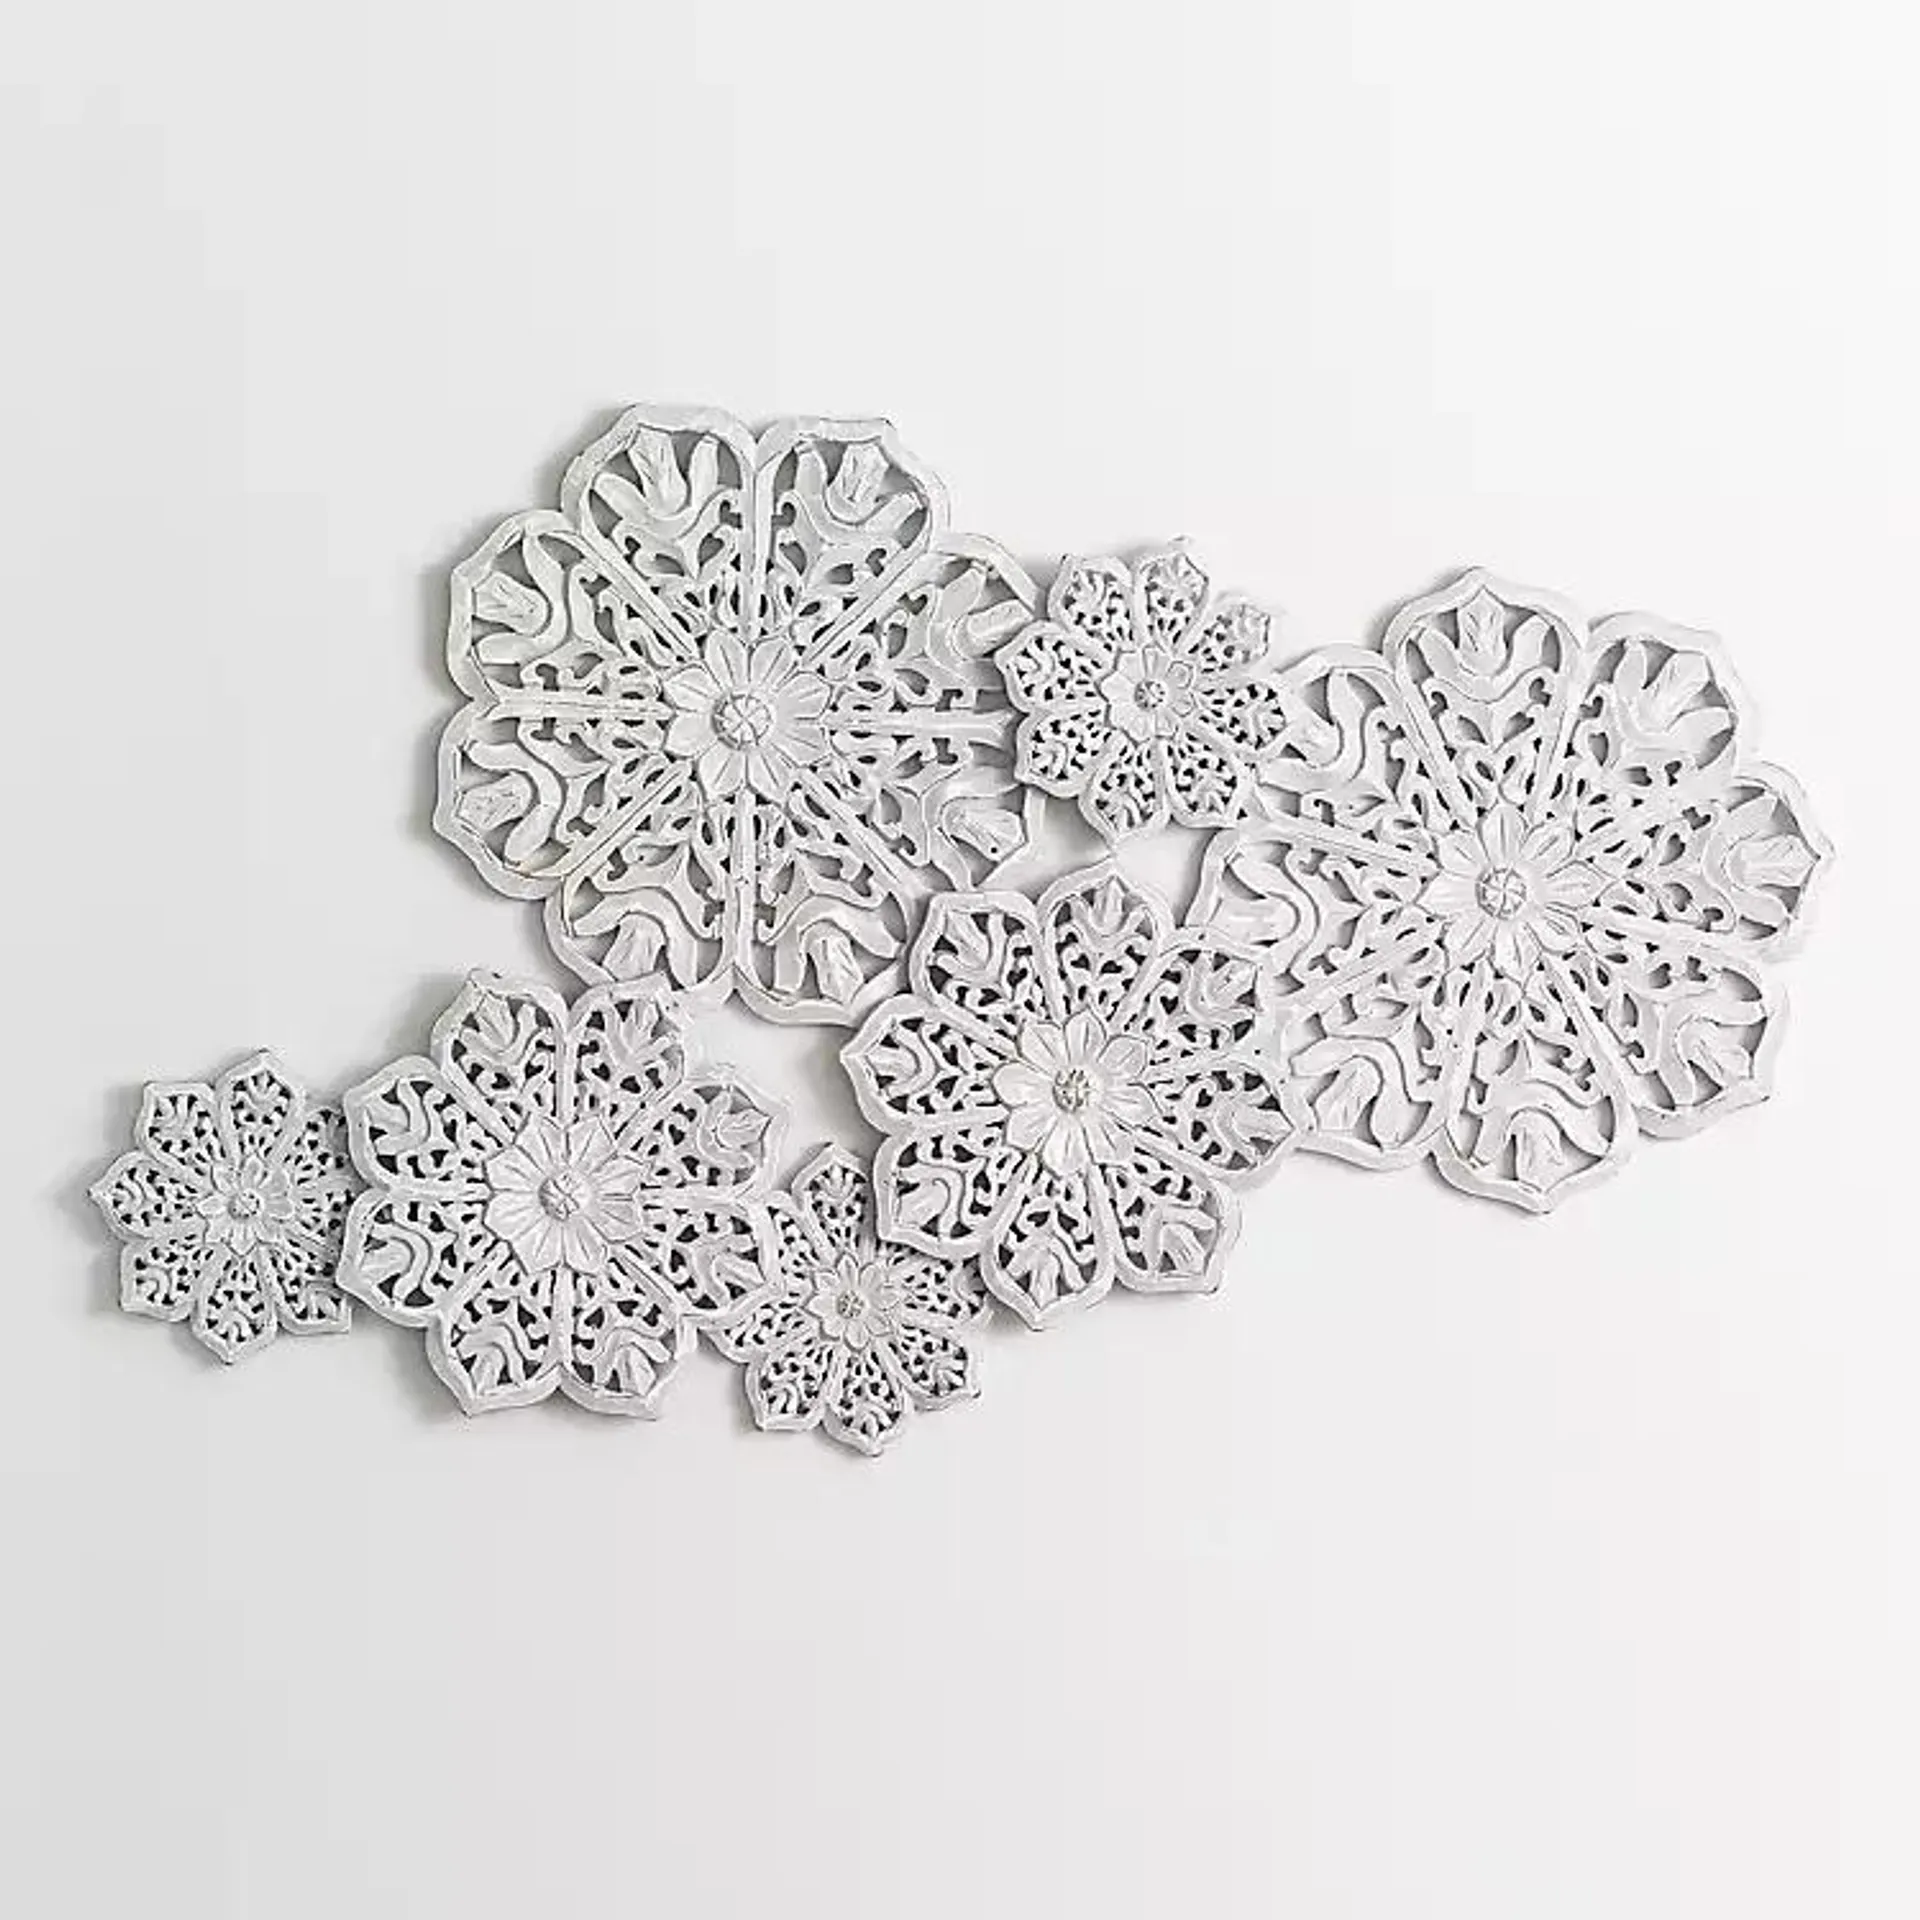 Graywashed Wood Scalloped Floral Wall Plaque